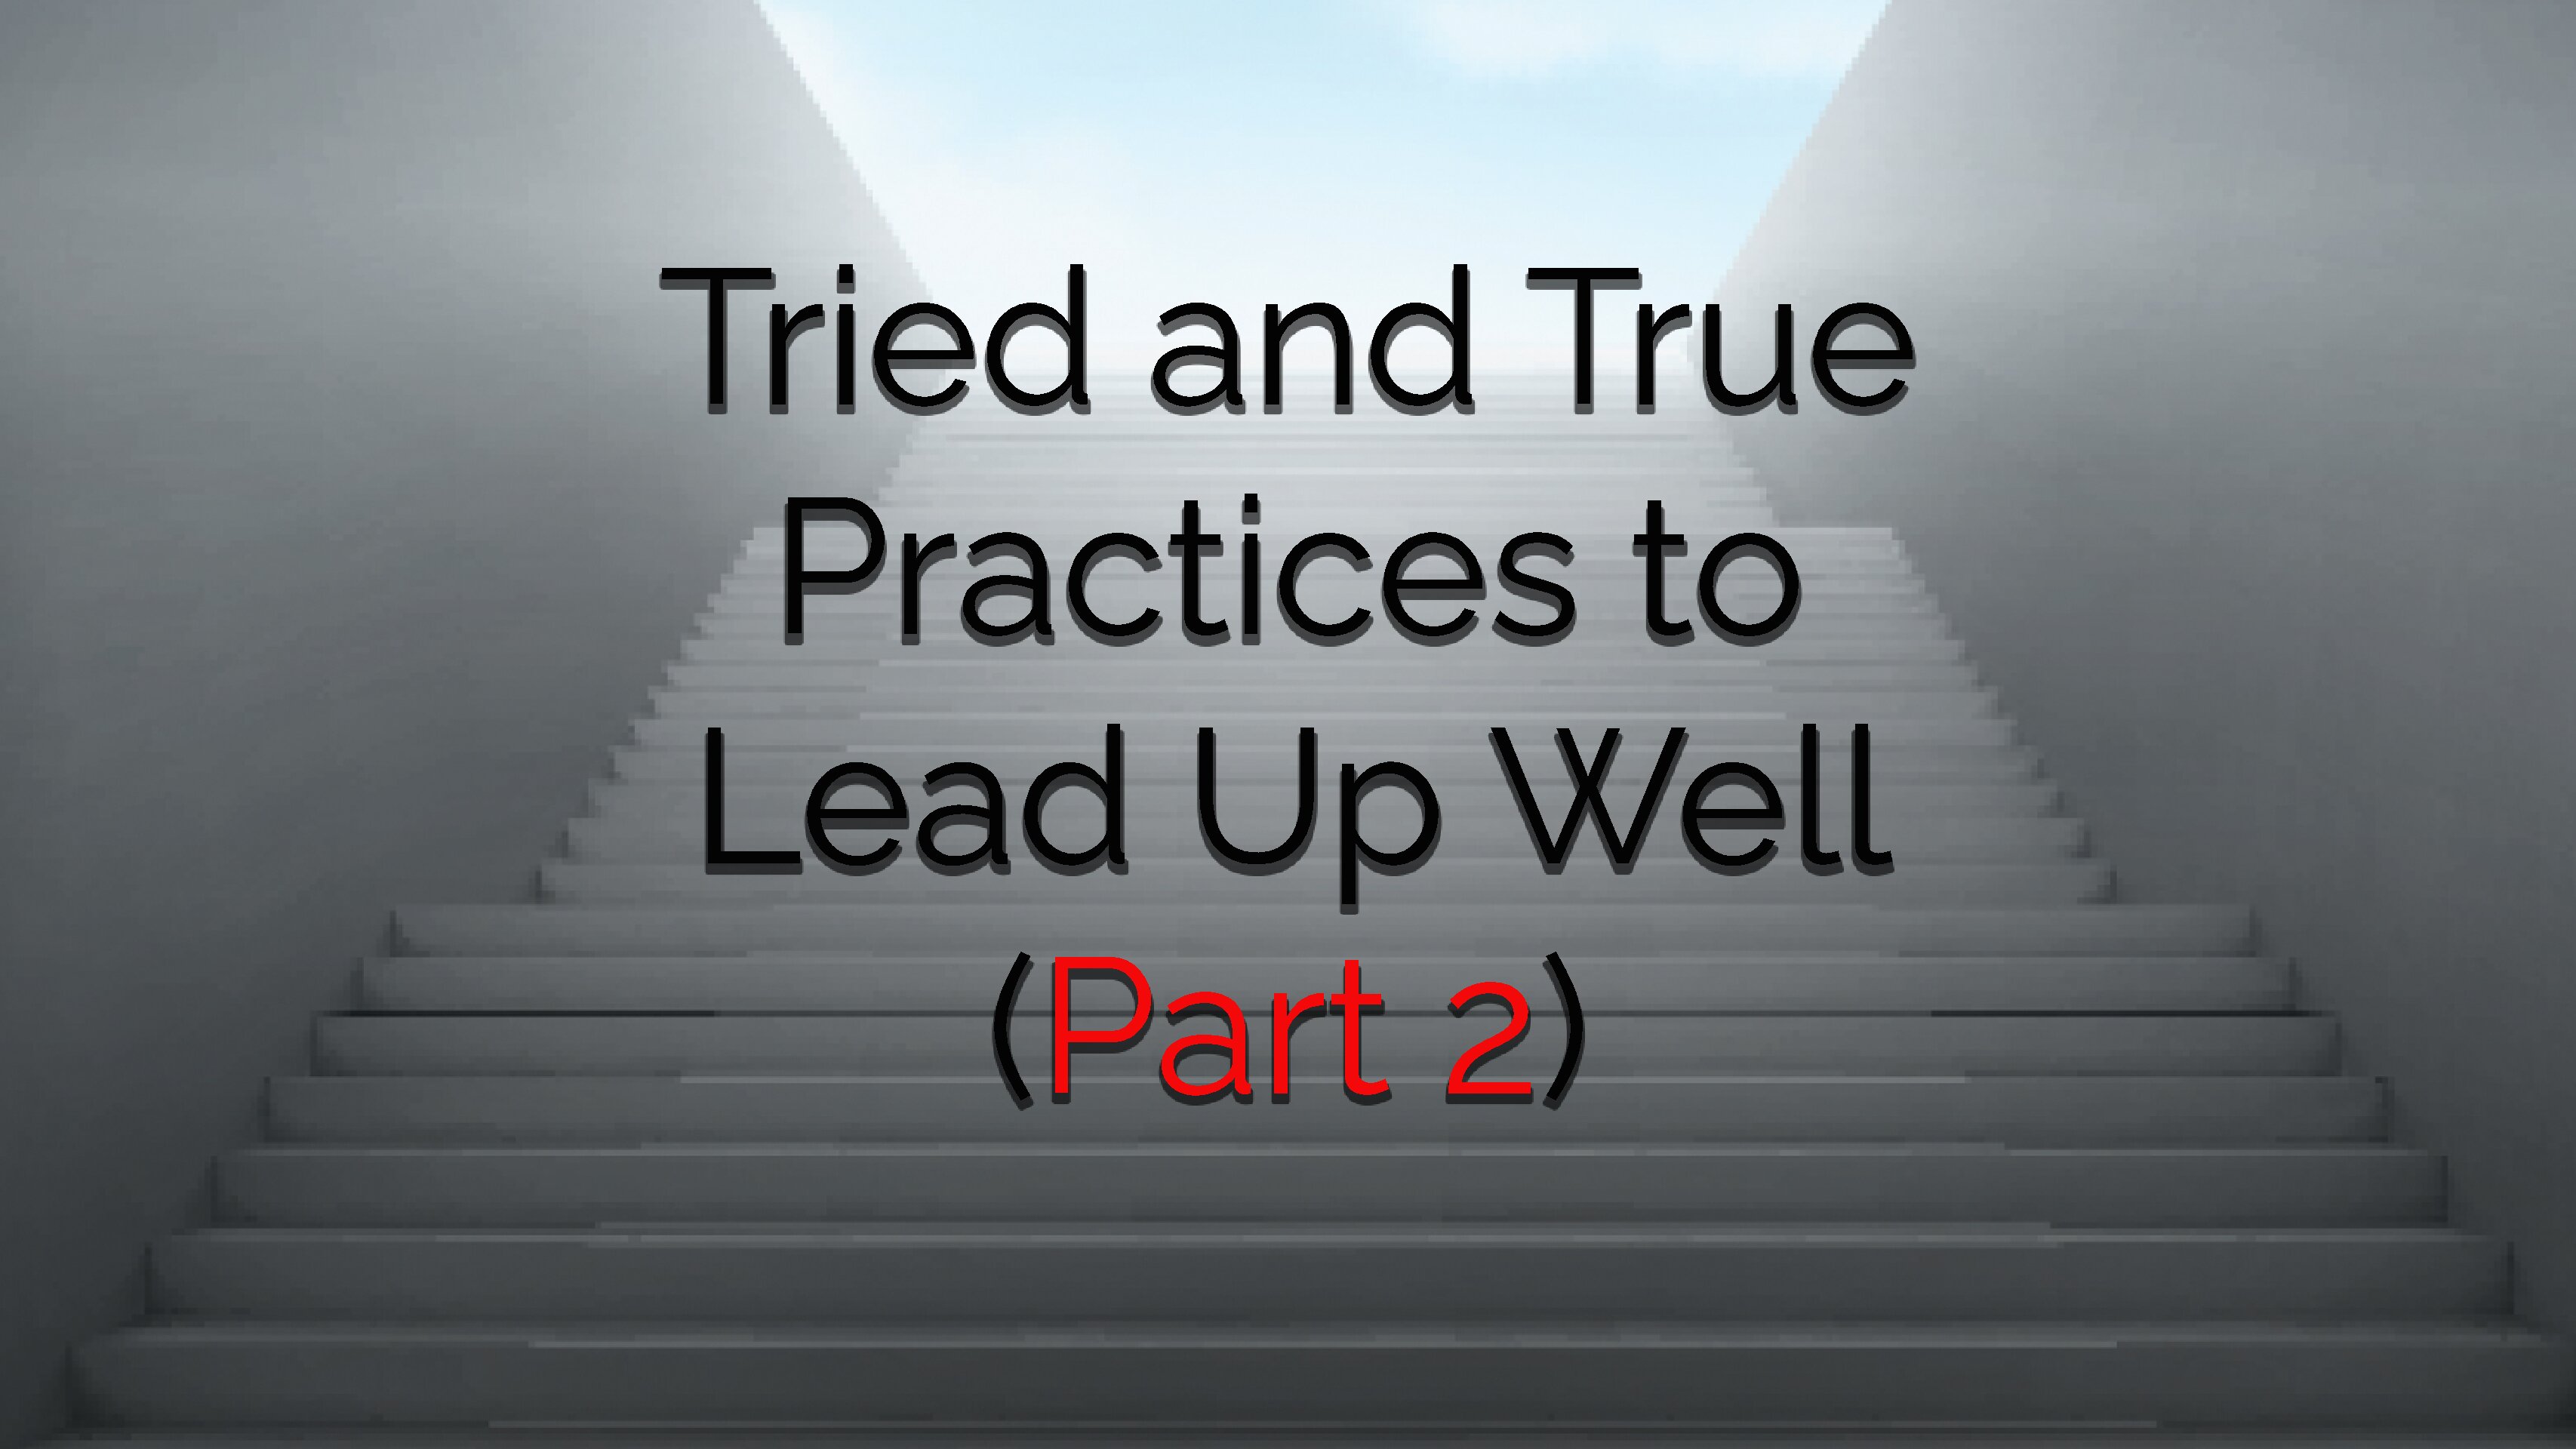 Tried and True Practices to Lead Up Well (Part 2)